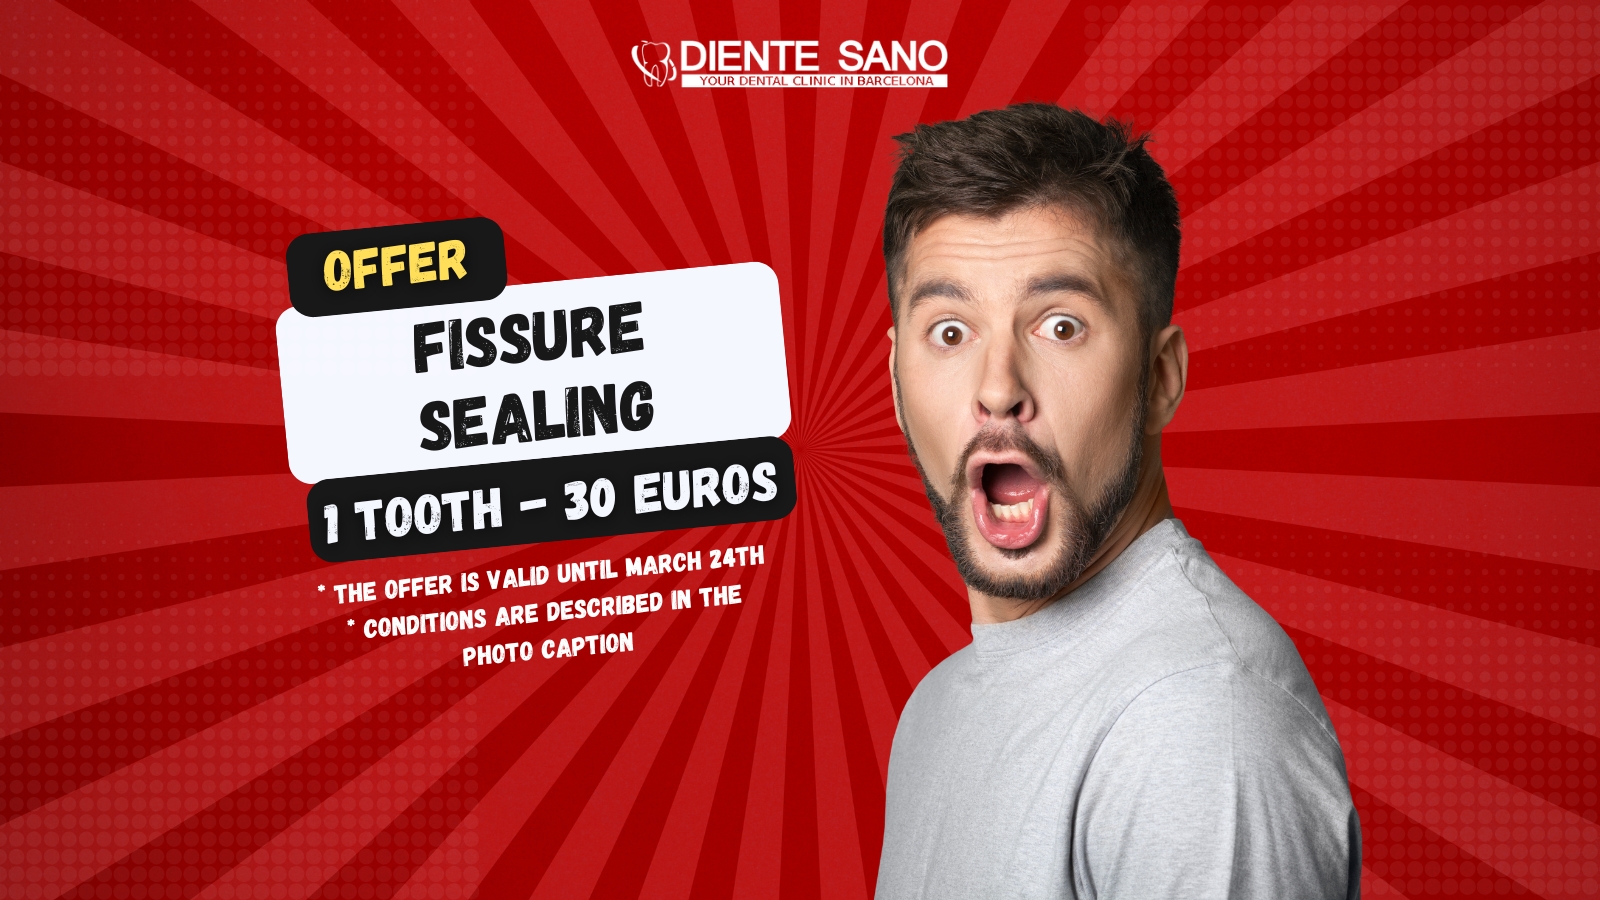 Special offer at Diente Sano Dental Clinic in Barcelona!: Taking care of your smile starts with prevention. We invite you to take advantage of our unique offer for sealing fissures in a single tooth for just 30 euros!